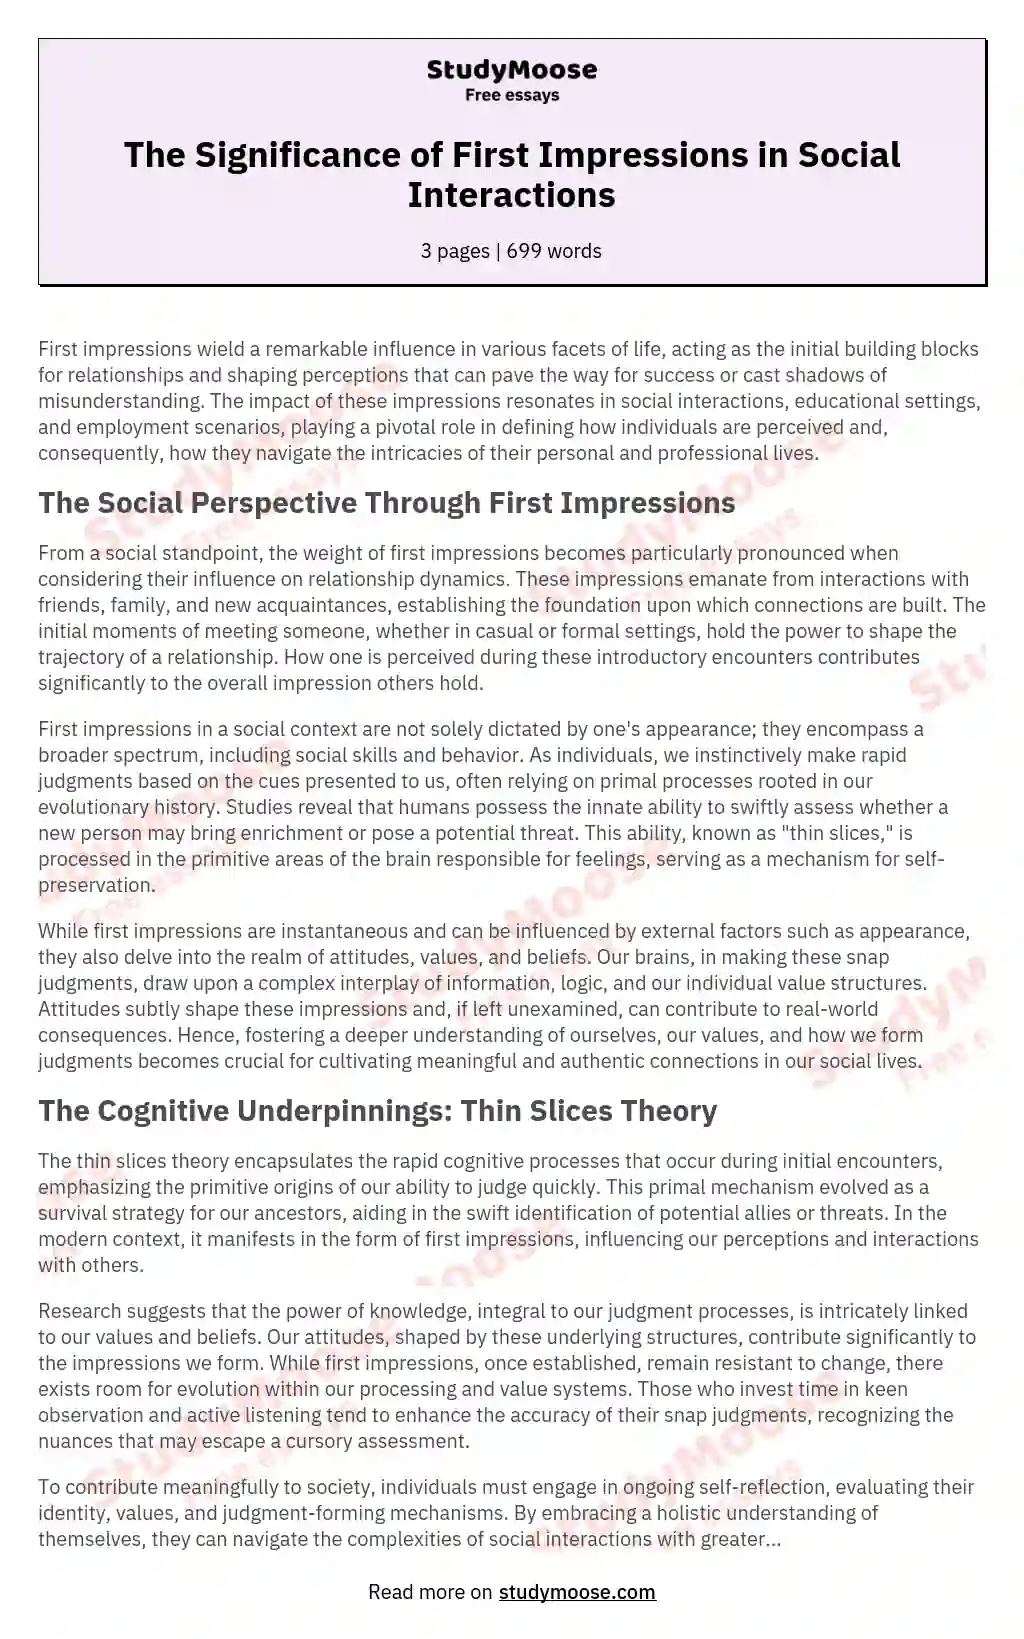 The Significance of First Impressions in Social Interactions essay